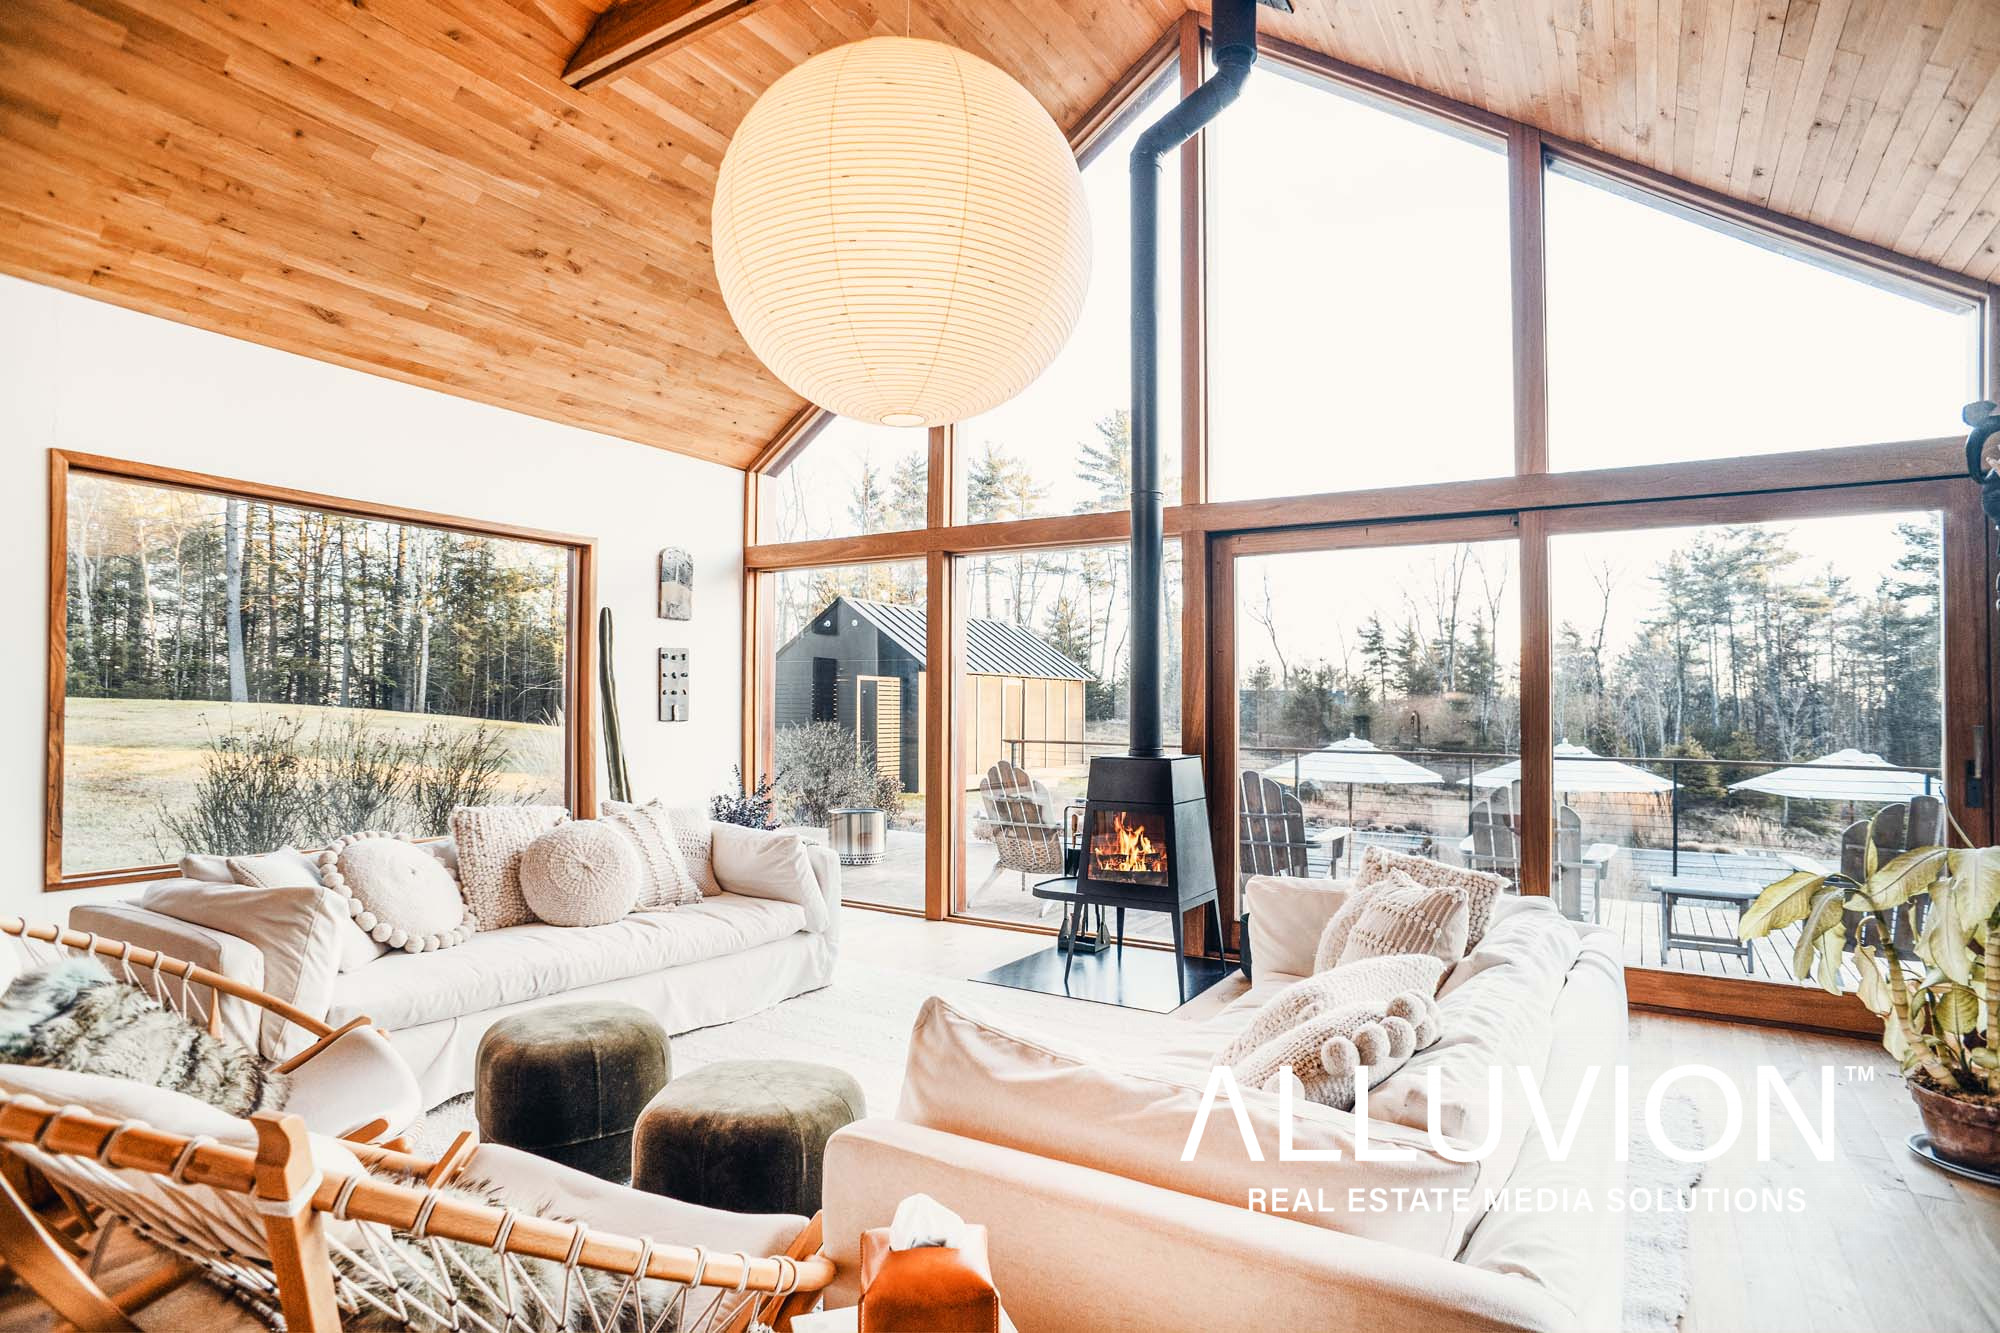 Modern A-Frame Cabin, Upstate, NY – Airbnb Listing Photography by Maxwell Alexander